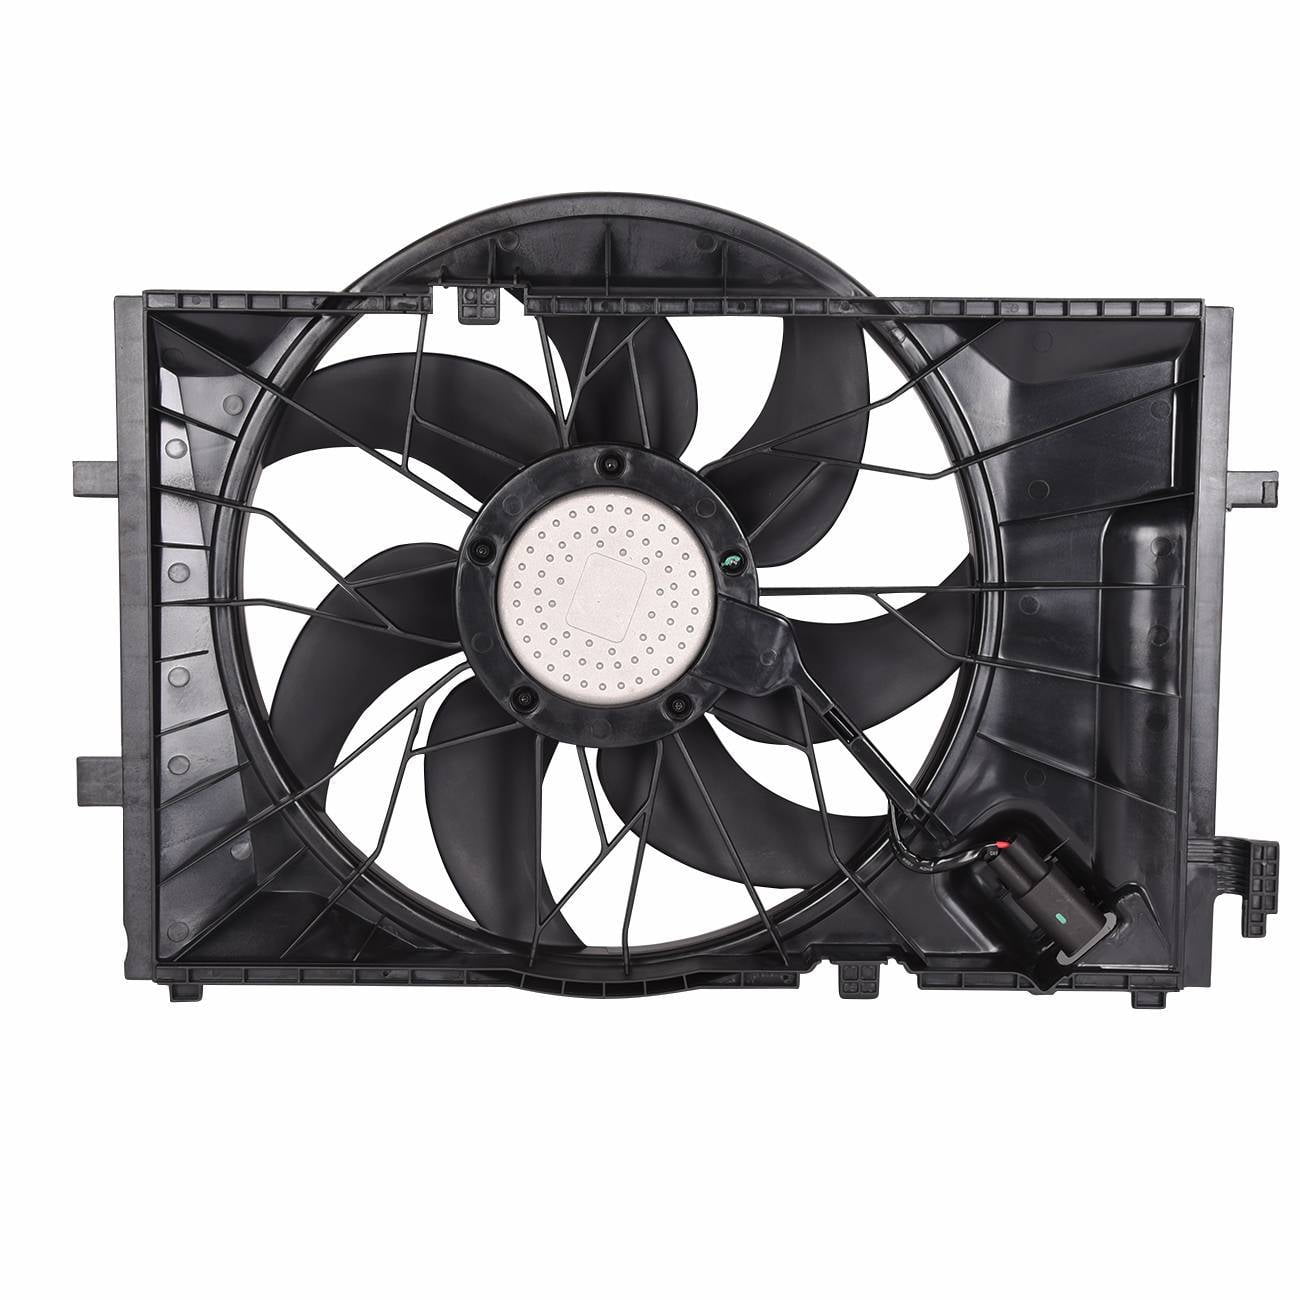 Volkswagen R32 Dual Radiator And Condenser Fan Assembly